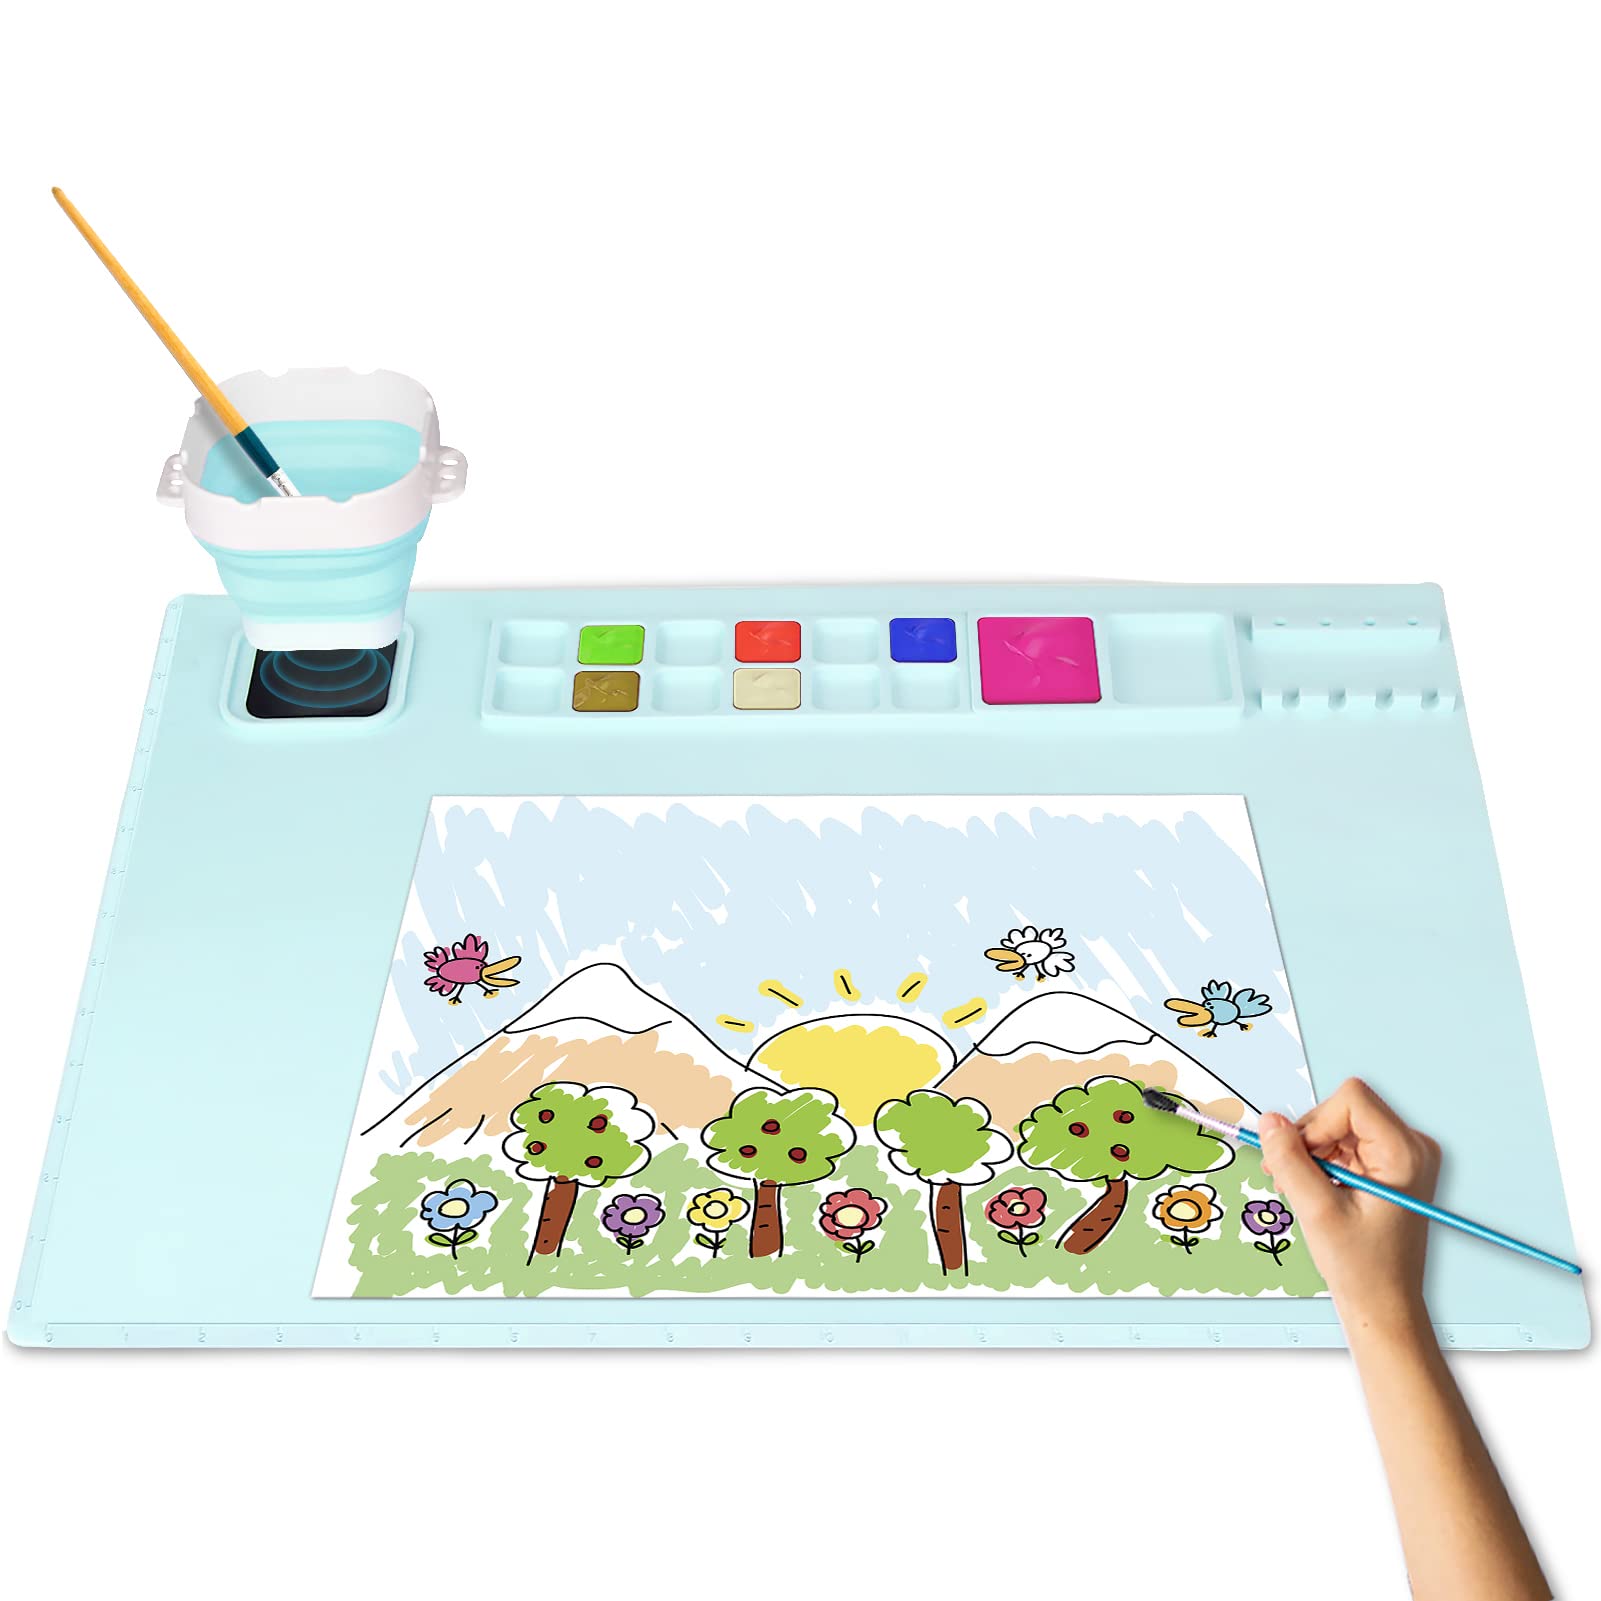 Silicone Craft Mat, Nonstick Silicone Painting Mat 16x 20 Large Silicone  Craft Sheet with Cleaning Cup and Paint Holder, Multipurpose Silicone Art